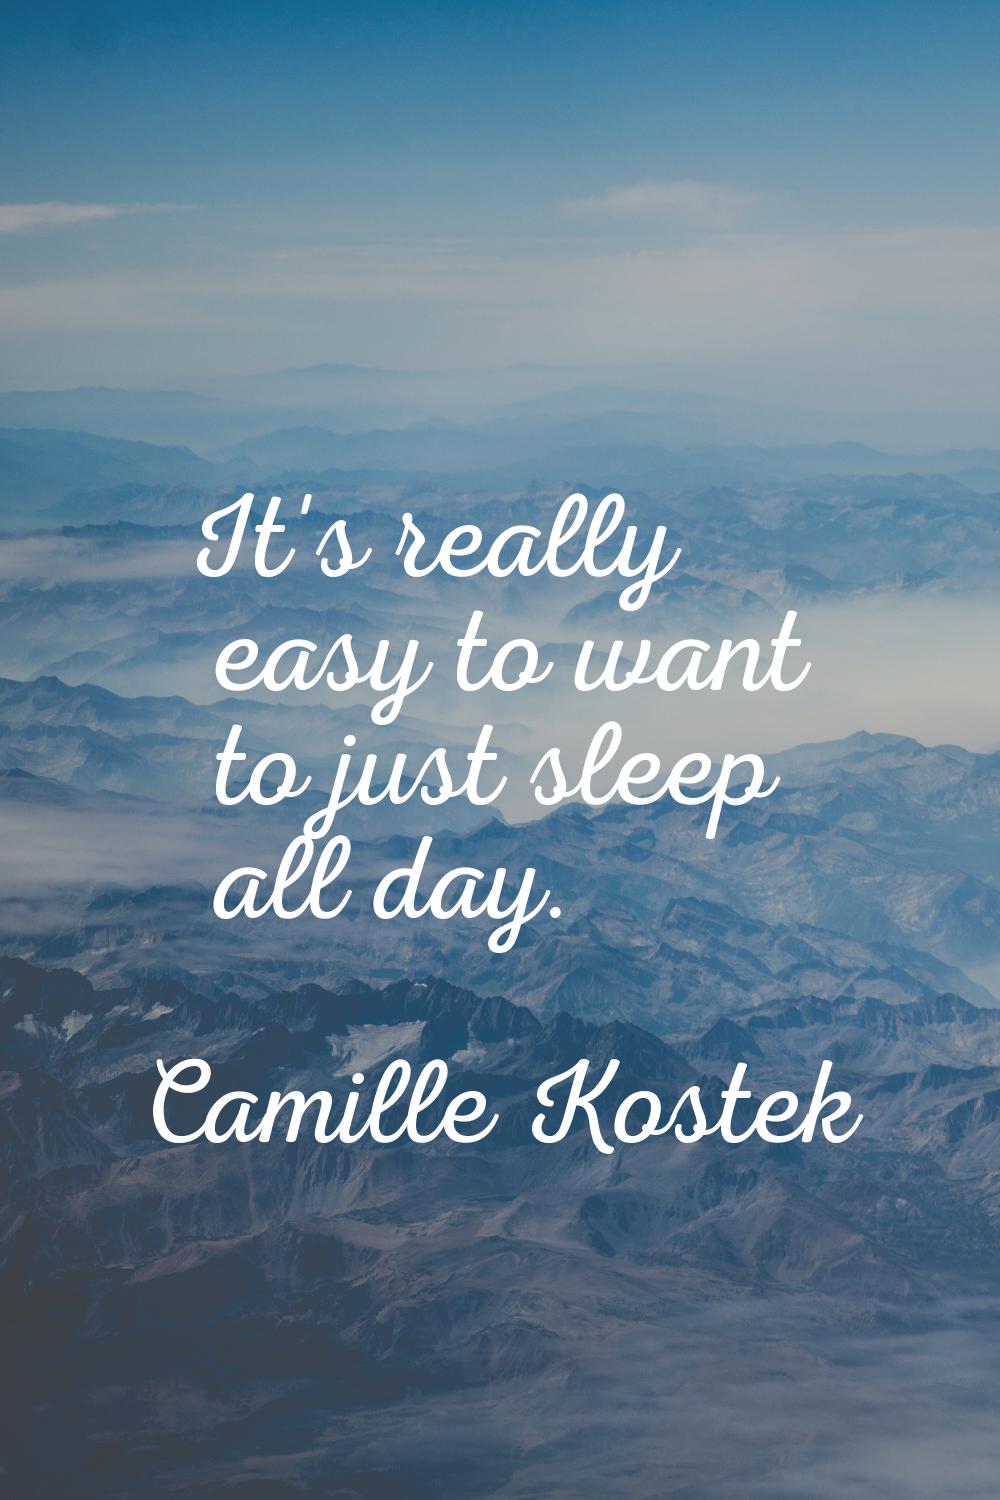 It's really easy to want to just sleep all day.